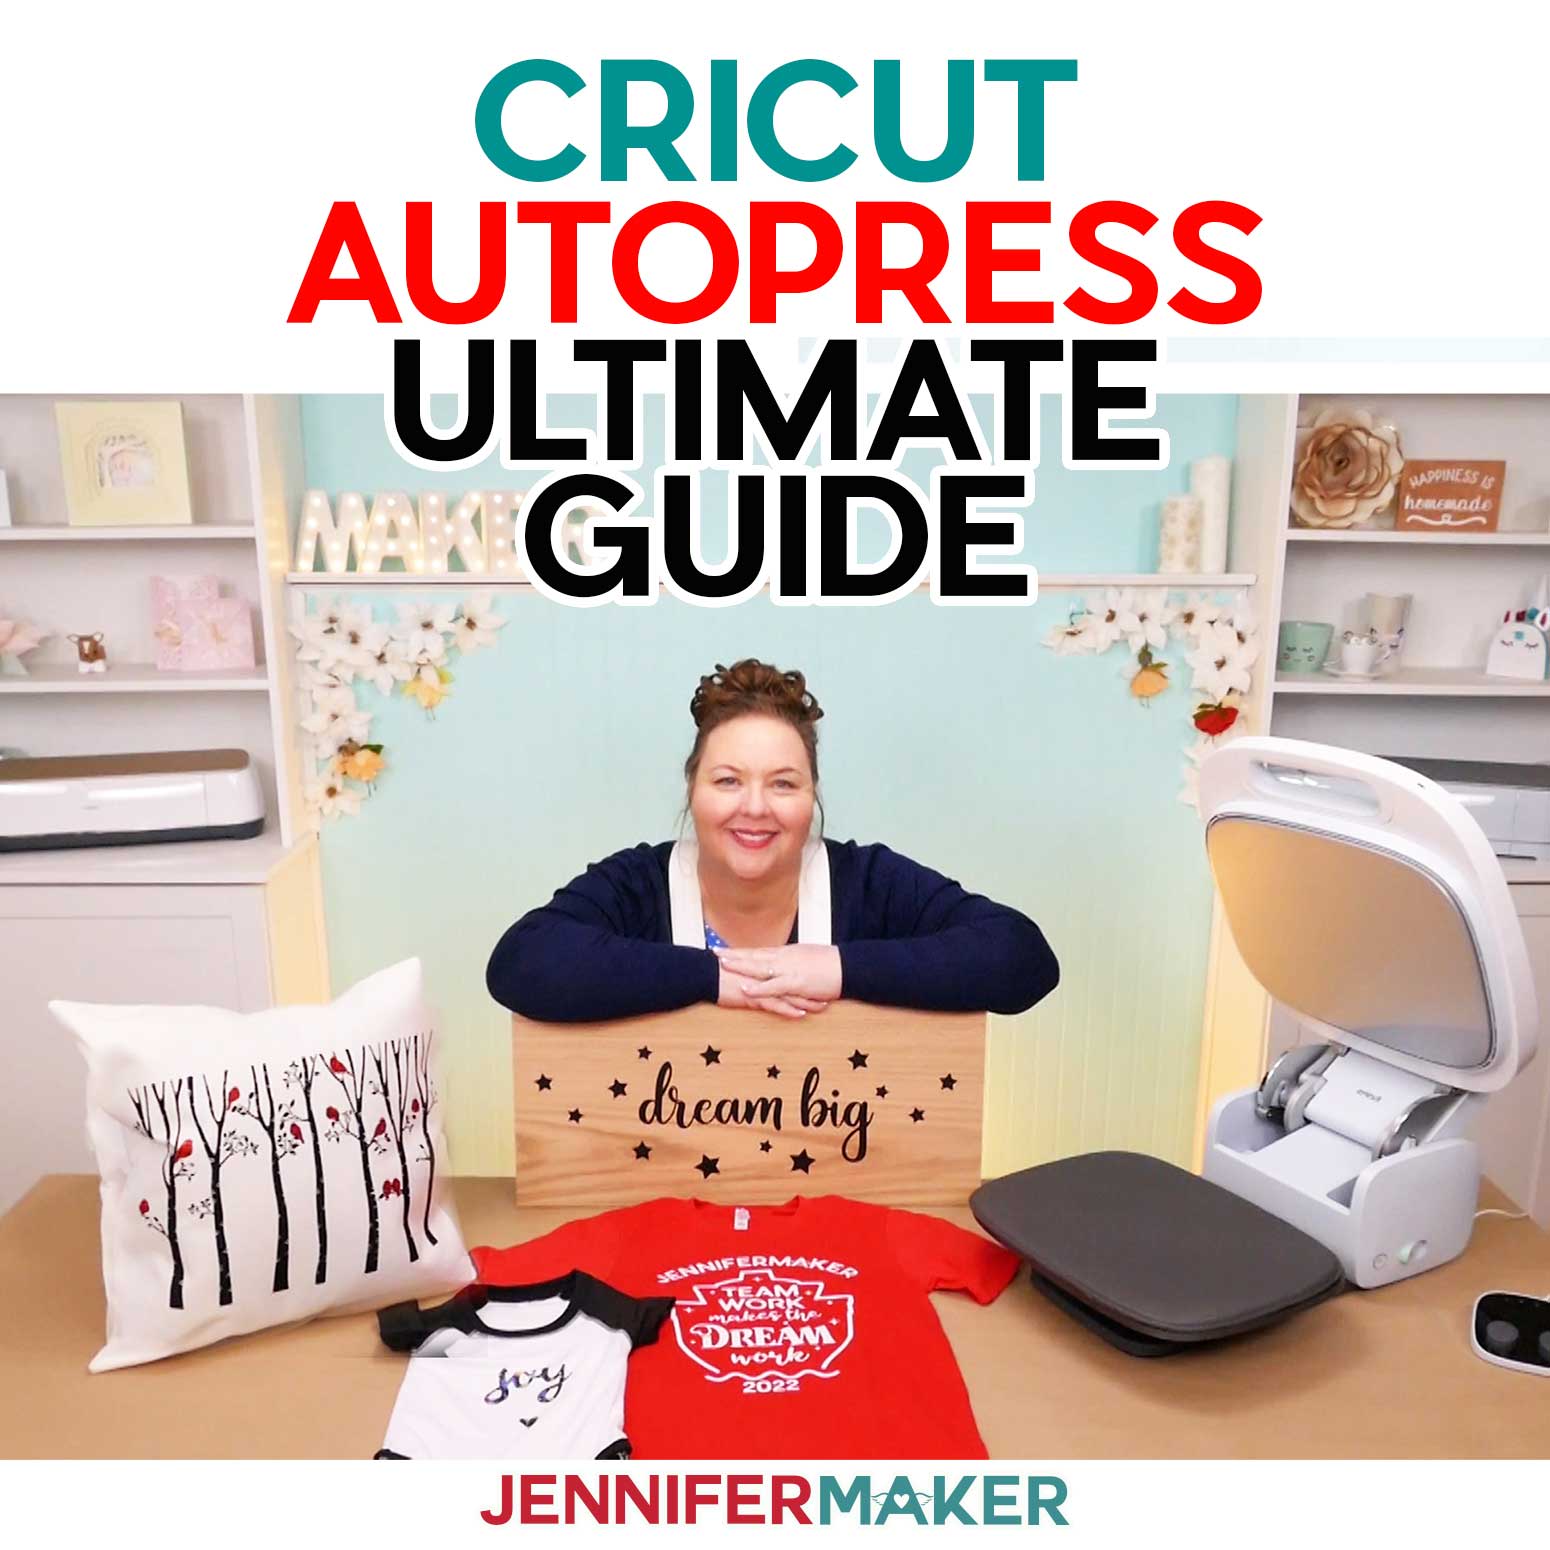 Cricut Autopress: Everything You Need to Know About Cricut’s Best Heat Press!